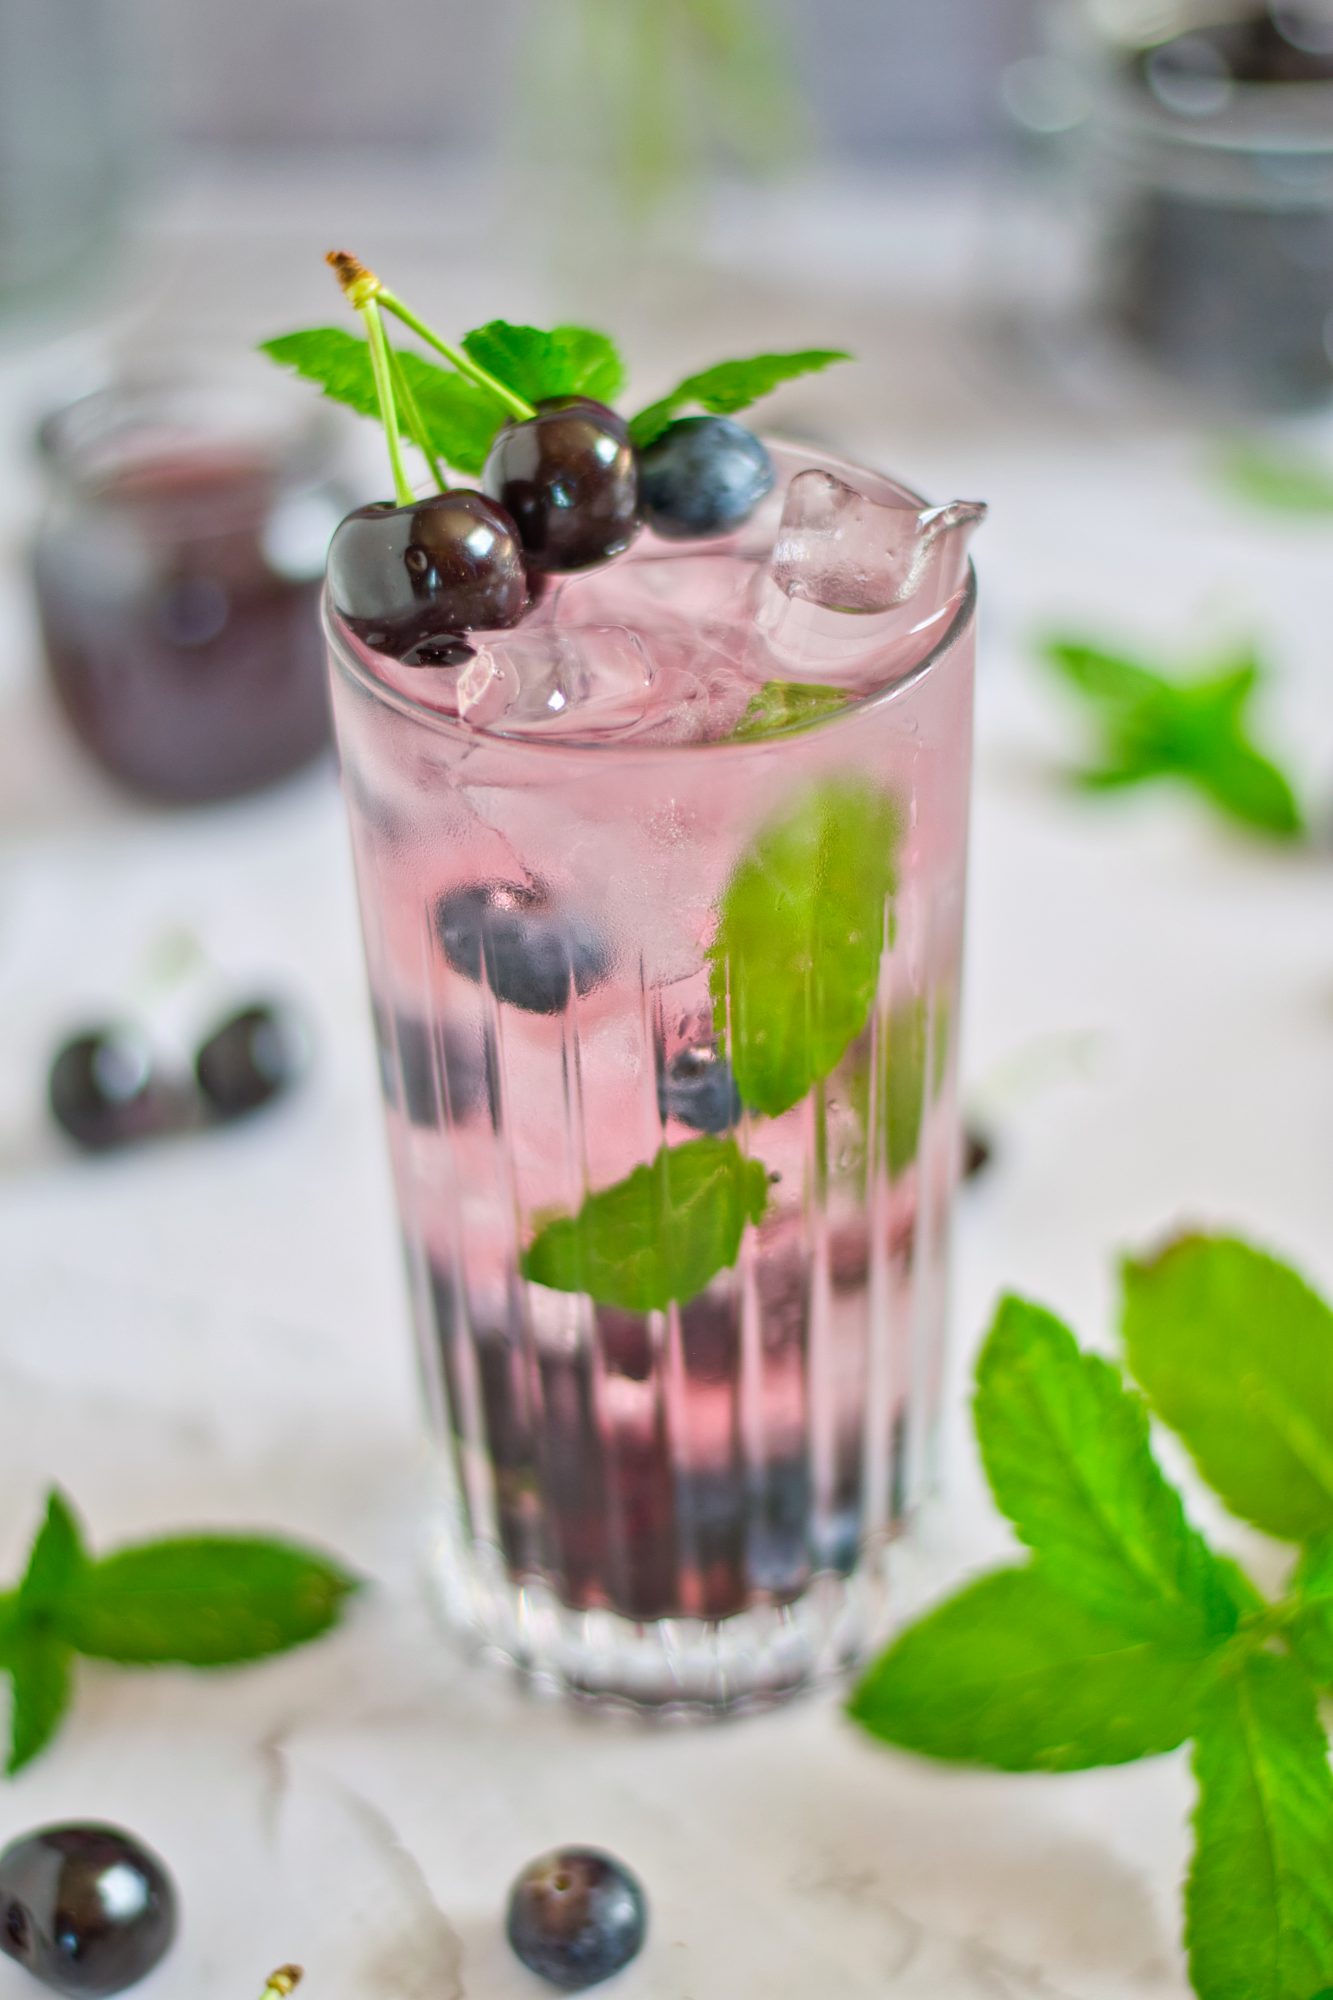 https://prettydomesticated.com/wp-content/uploads/2022/03/Berry-Infused-Water-4.jpeg